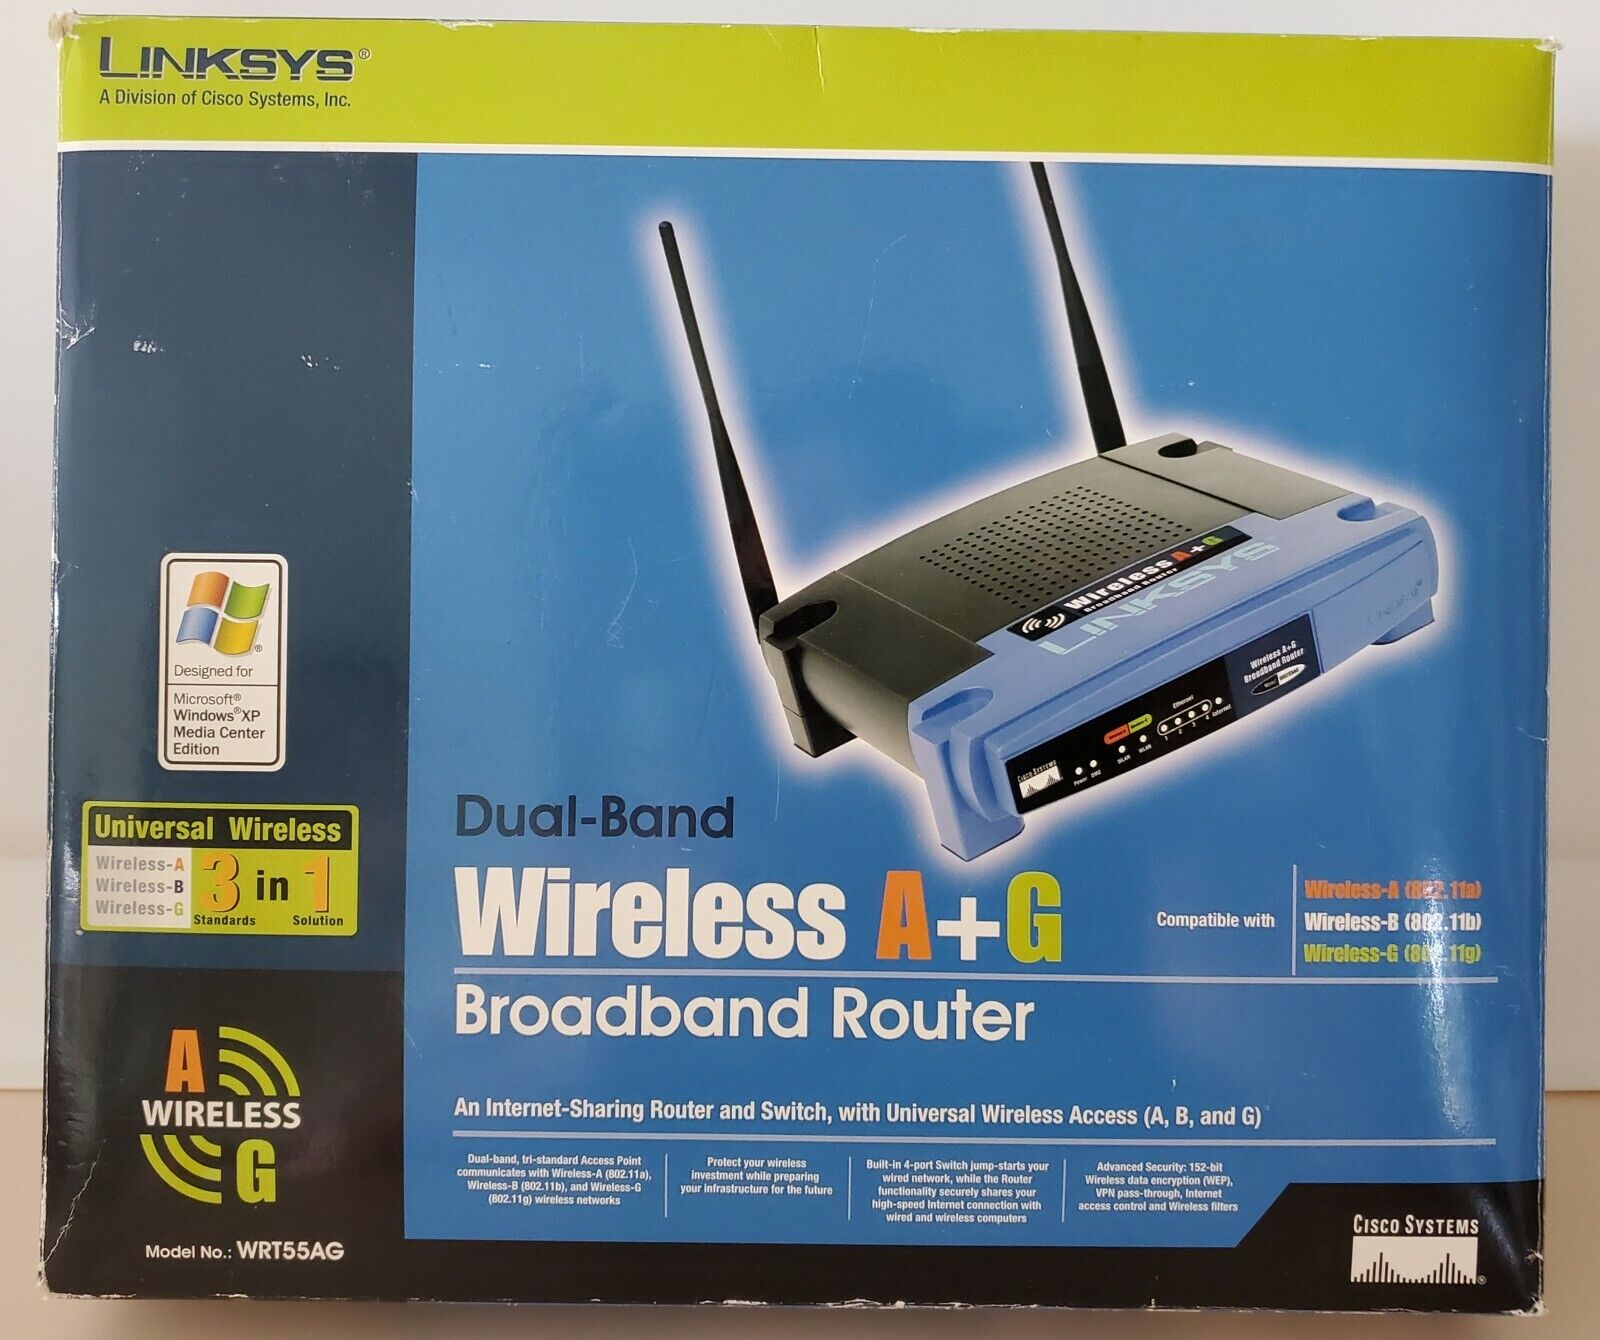 Linksys Dual-Band Wireless A+G Broadband Router WRT55AG. Incl all accessories.